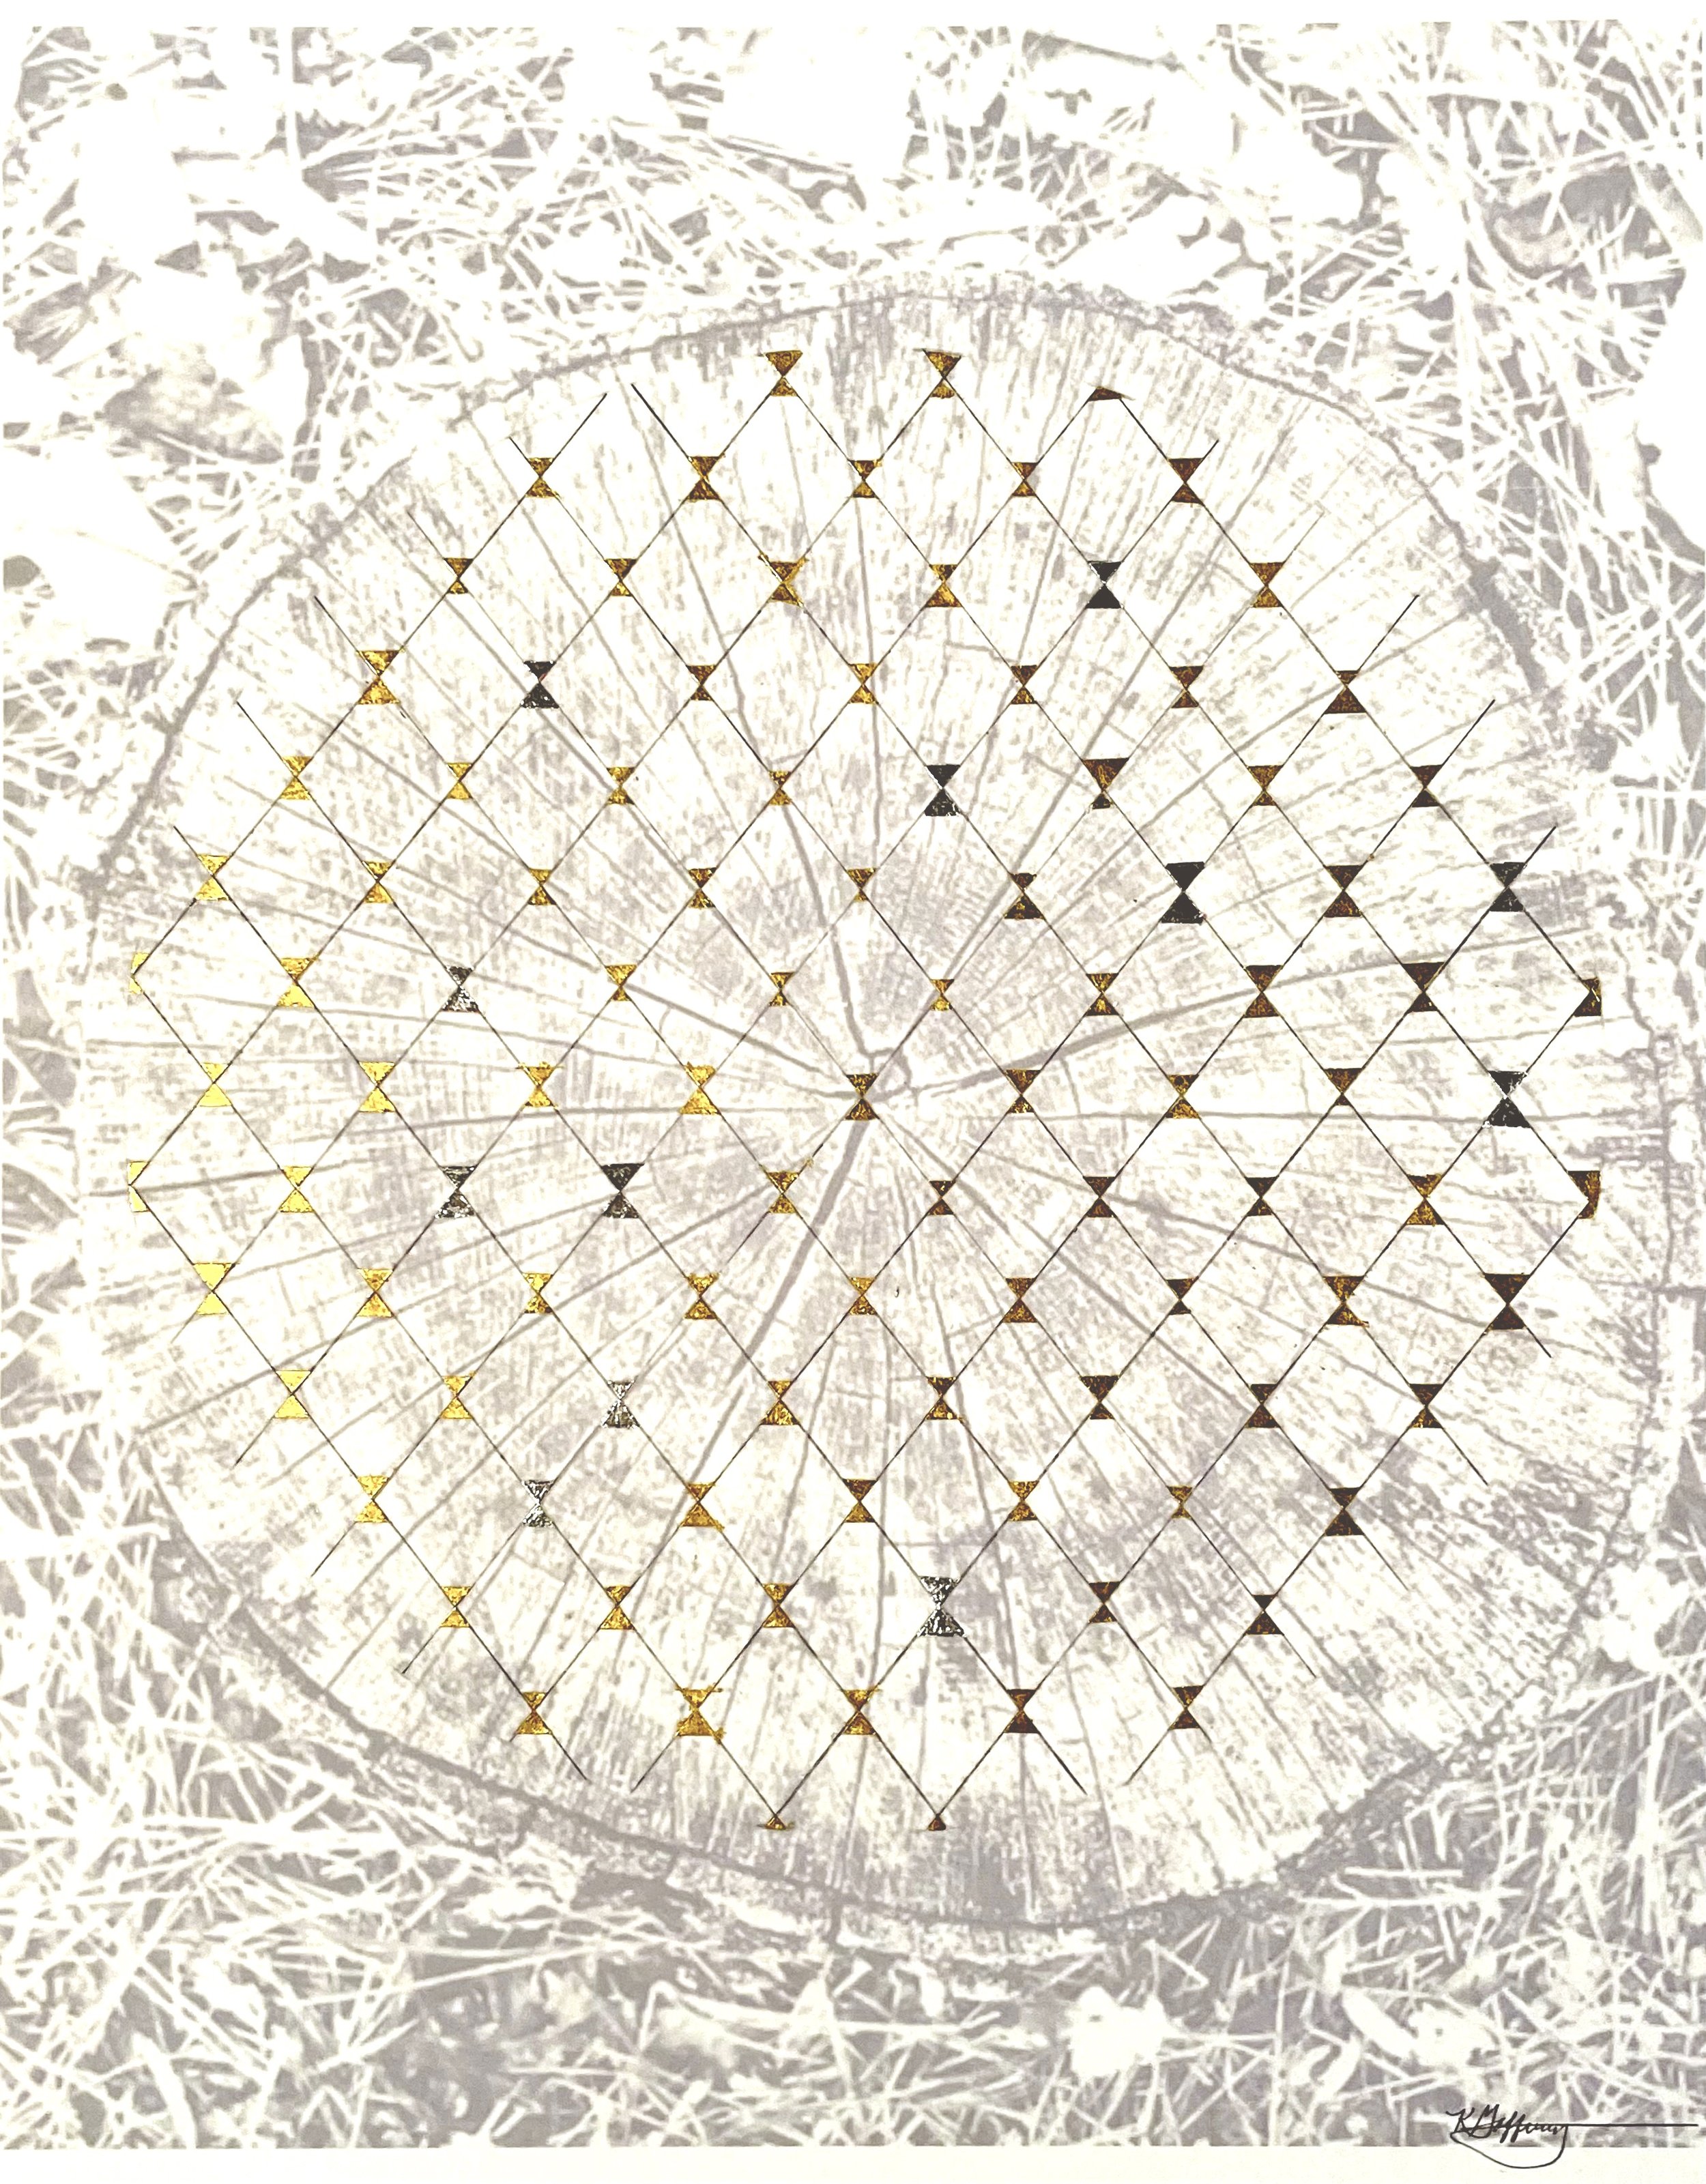 NATURE'S MANDALA #6 | 11 x 14 inches / 27.9 x 35.6 cm, photograph printed on Fabriano paper, graphite, gold leaf, silver leaf, 2022